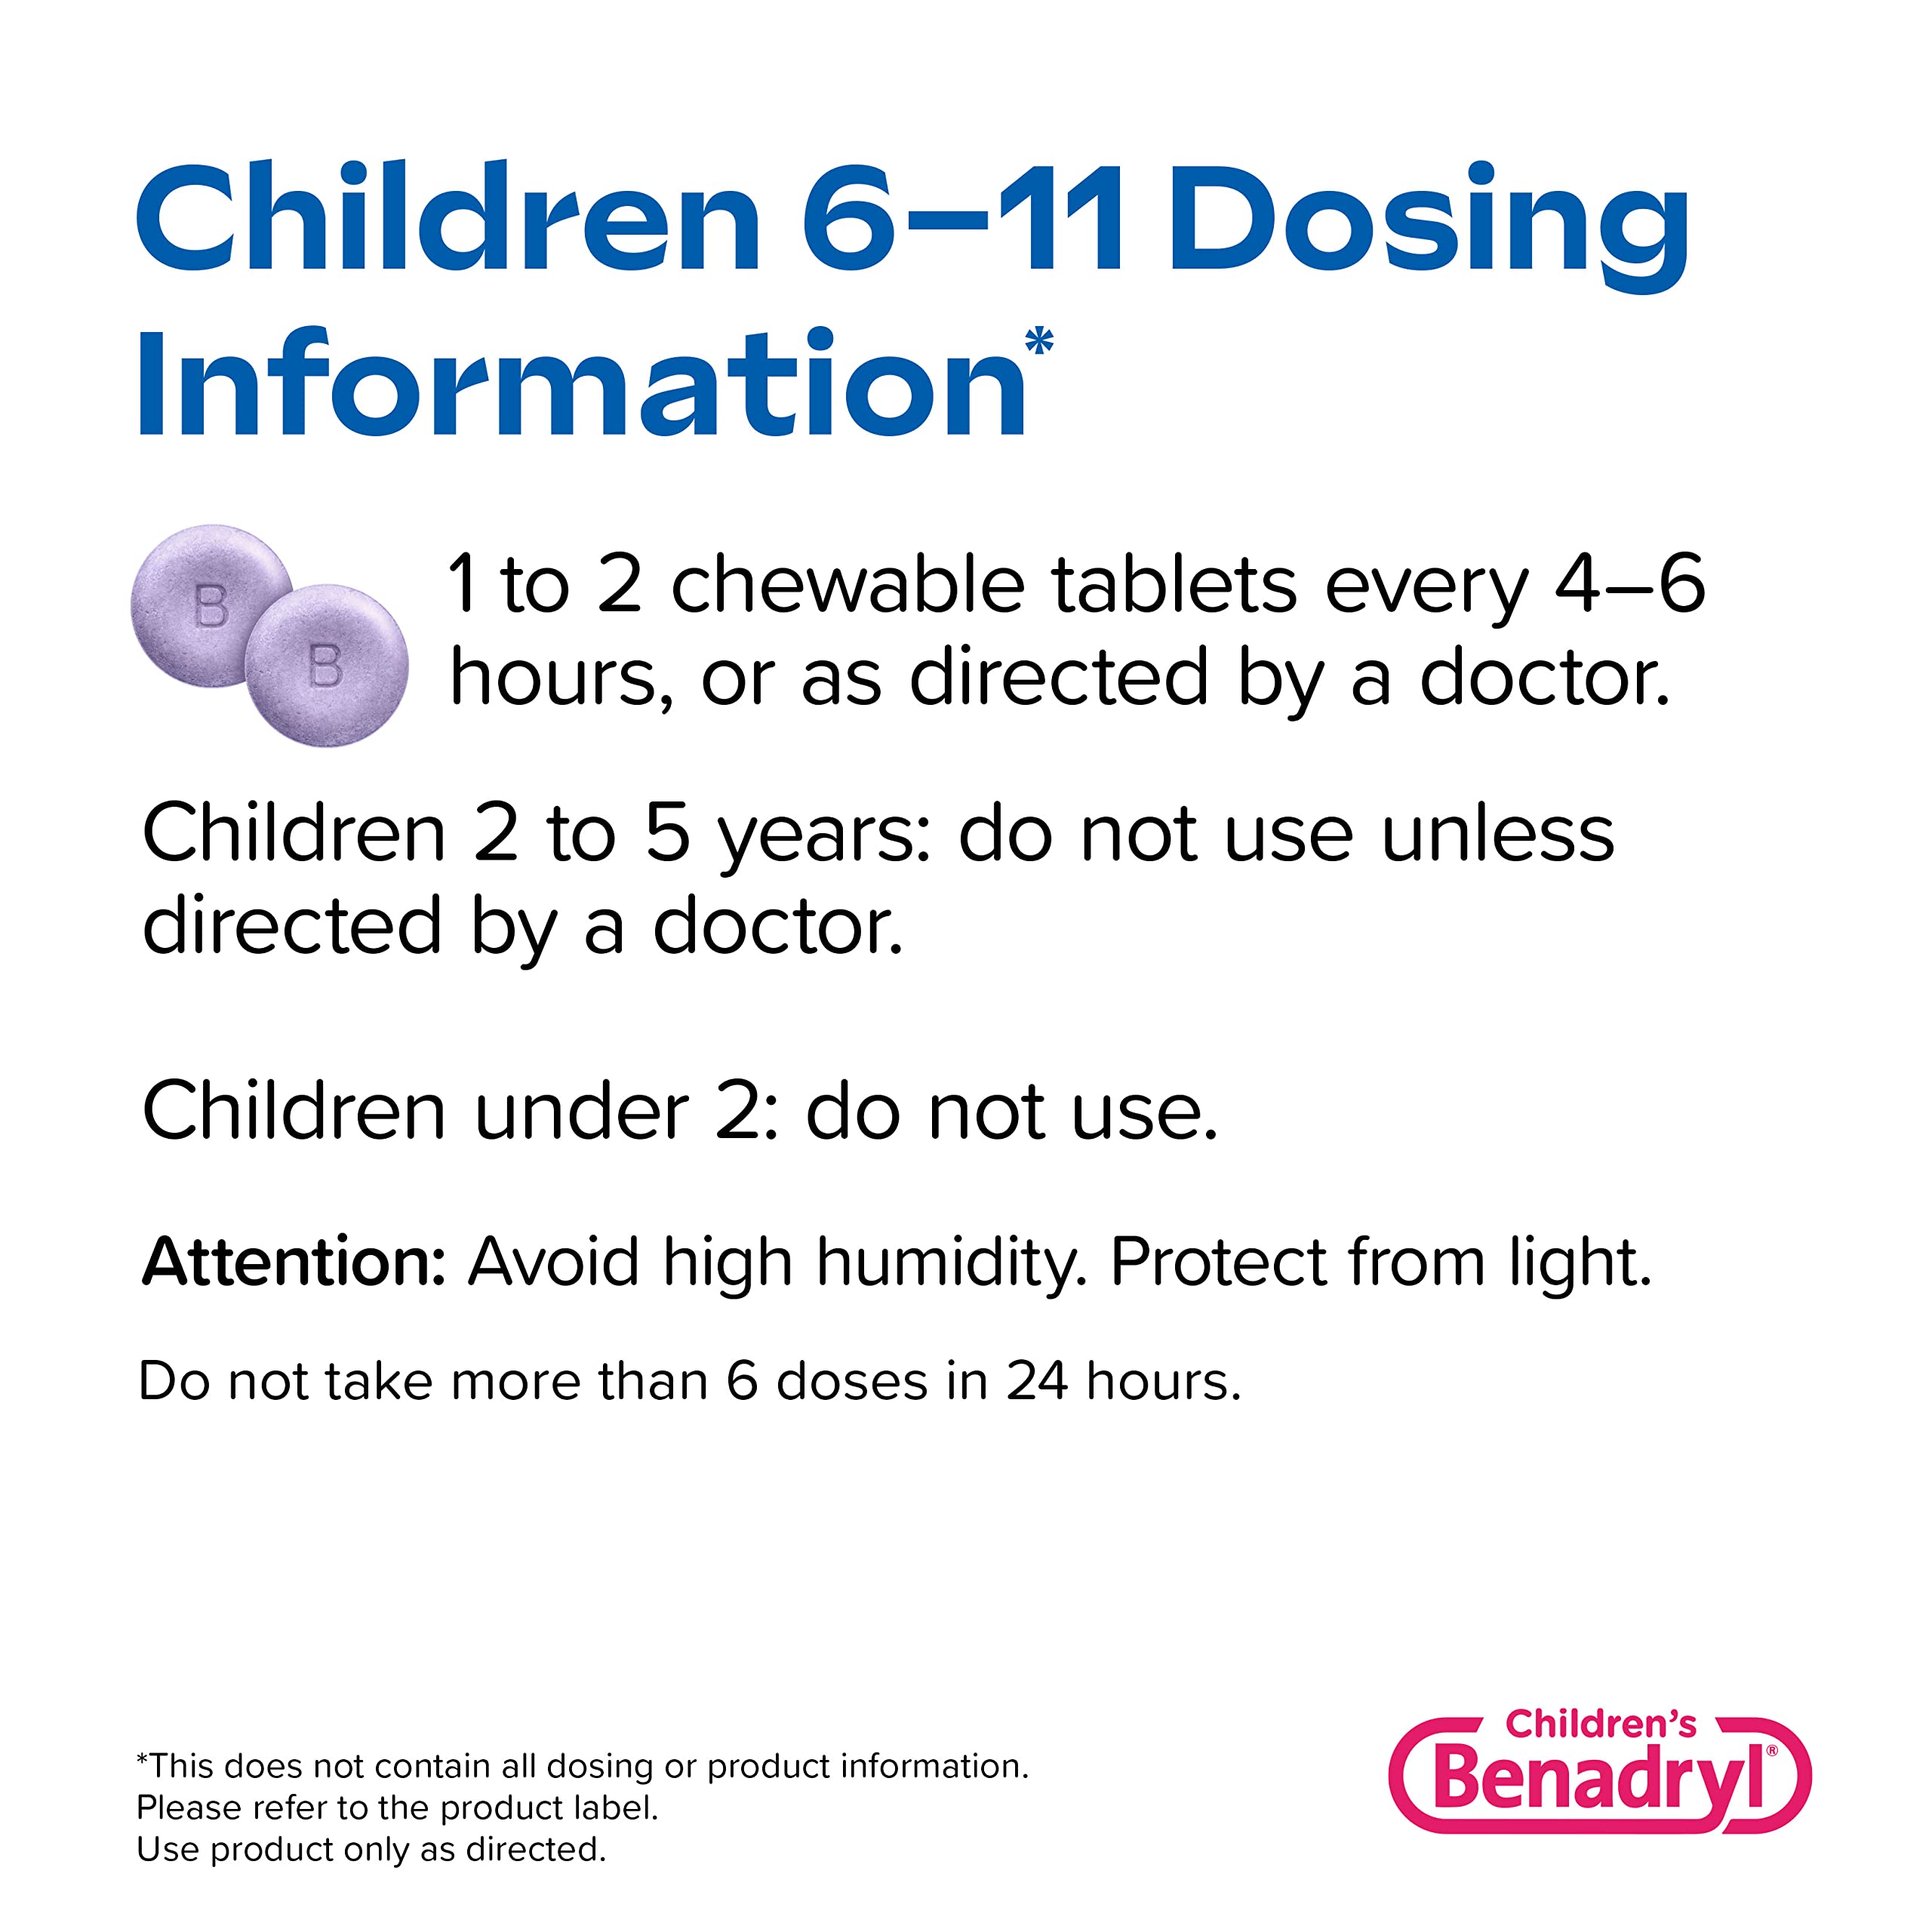 Benadryl Children's Allergy Chewables with Diphenhydramine HCl, Antihistamine Chewable Tablets for Relief of Allergy Symptoms Like Sneezing, Itchy Eyes, & More, Grape Flavor